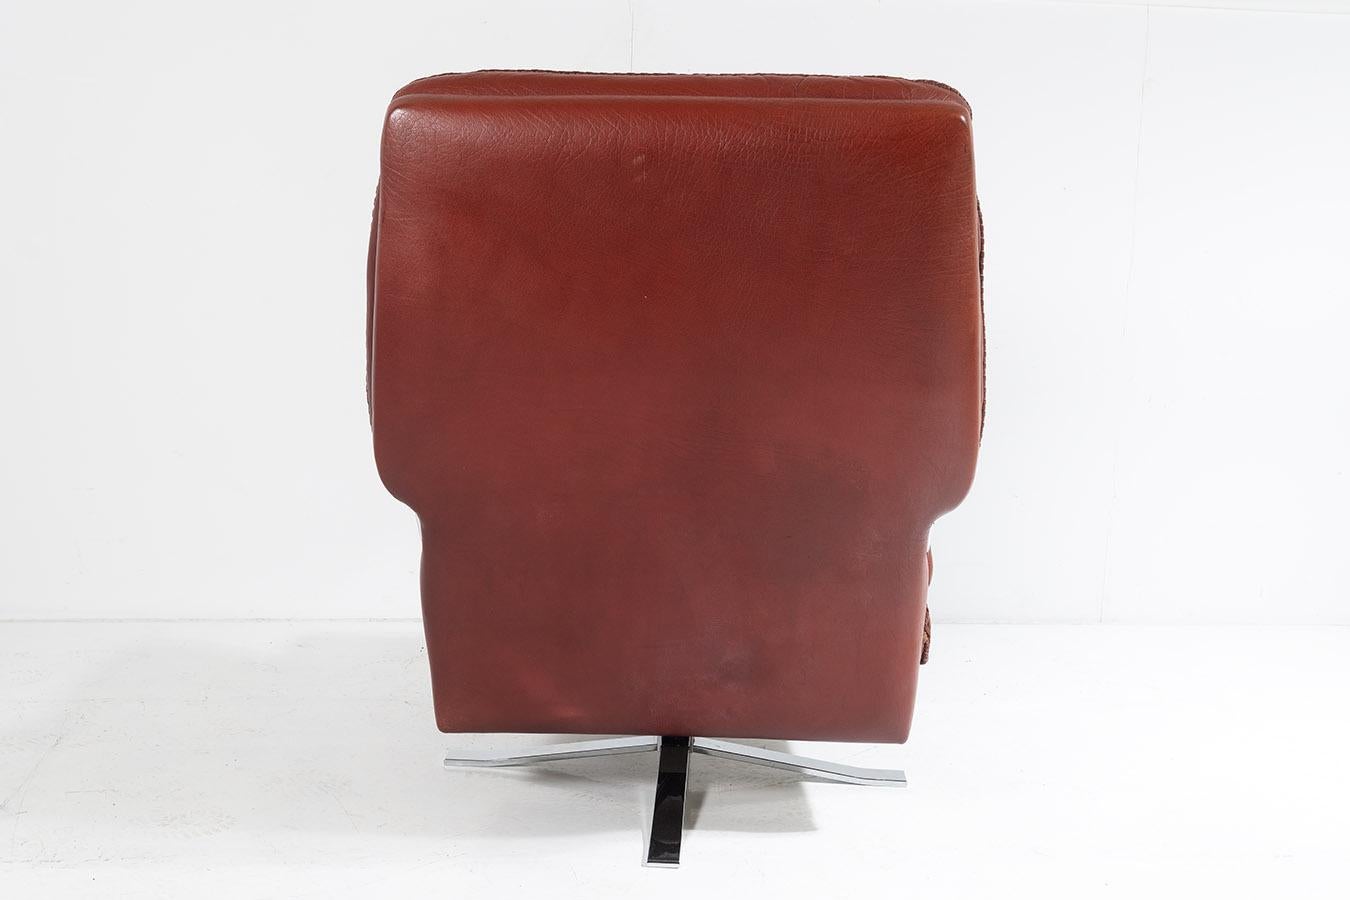 20th Century 1960s Mid Centry Burnt Orange Brown Leather Swivel Chair in style of Arne Norell For Sale